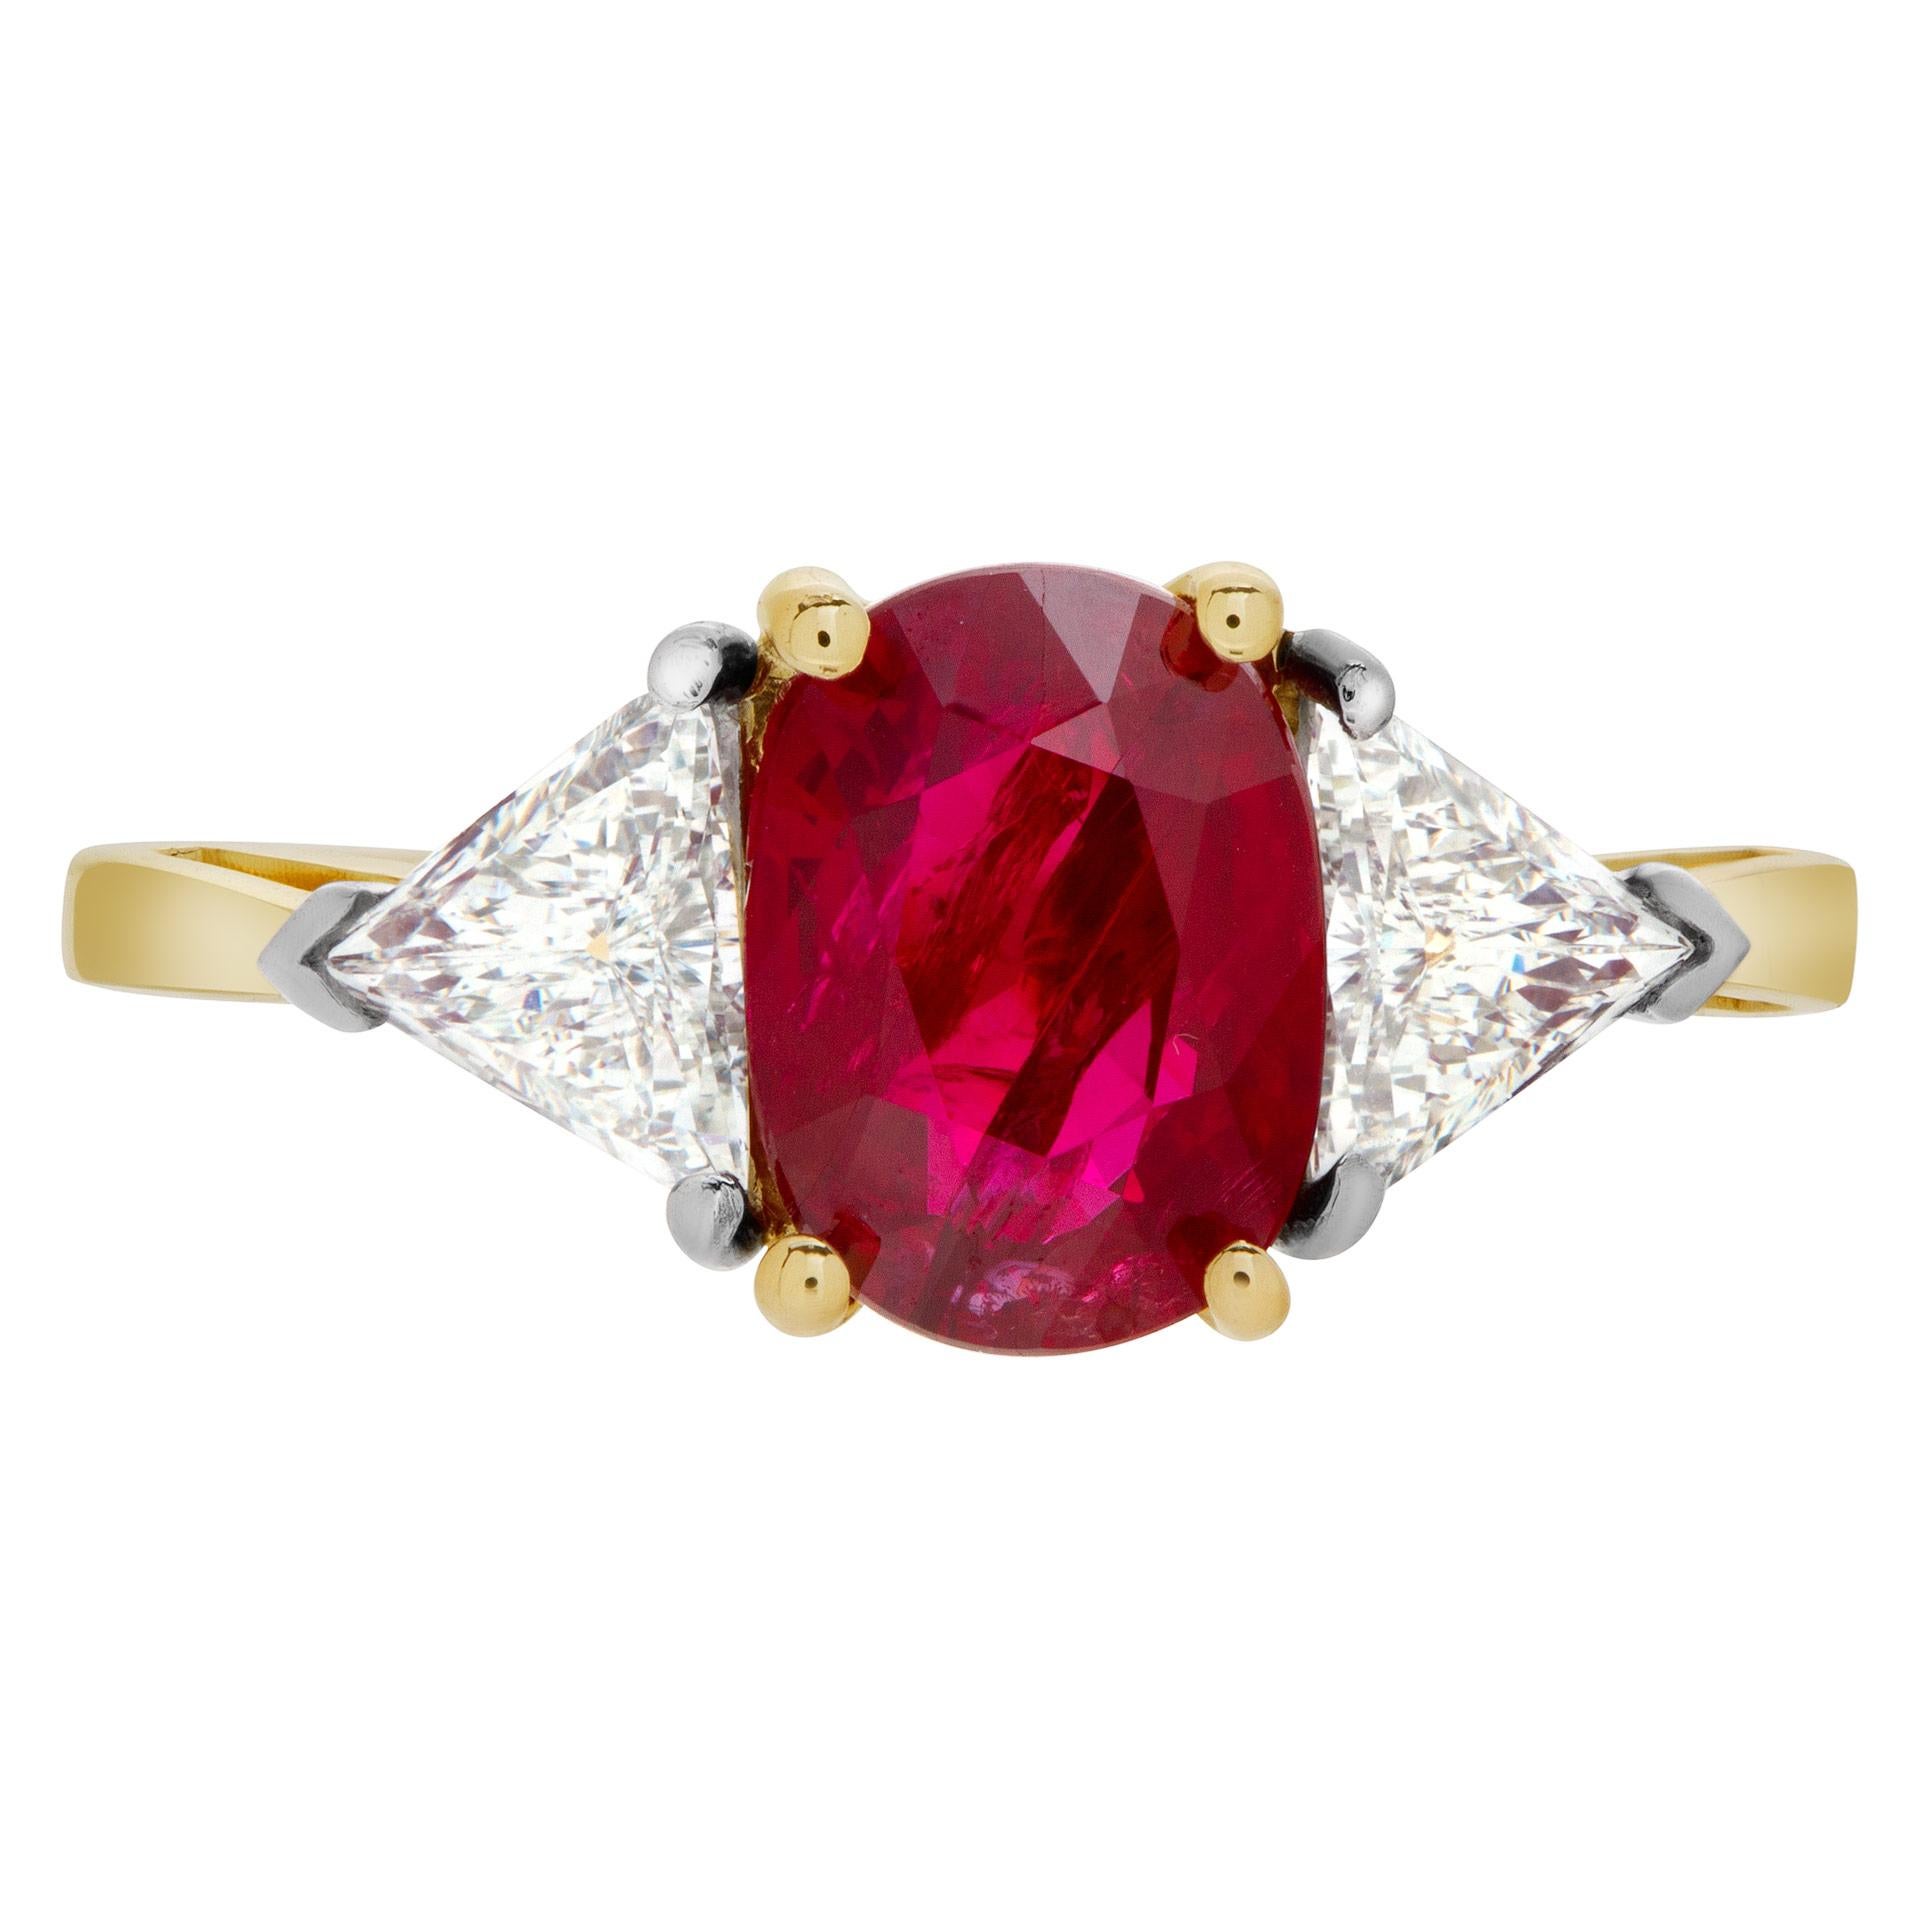 ESTIMATED RETAIL $26000 - YOUR PRICE $19500 - GIA certified diamonds 0.29 carat and 0.33 carat (I color, VS1 clarity) and AGL certified oval ruby 2.34 carat ring set in 18k yellow gold and platinum. Size 6.25. This AGL certified ring is currently